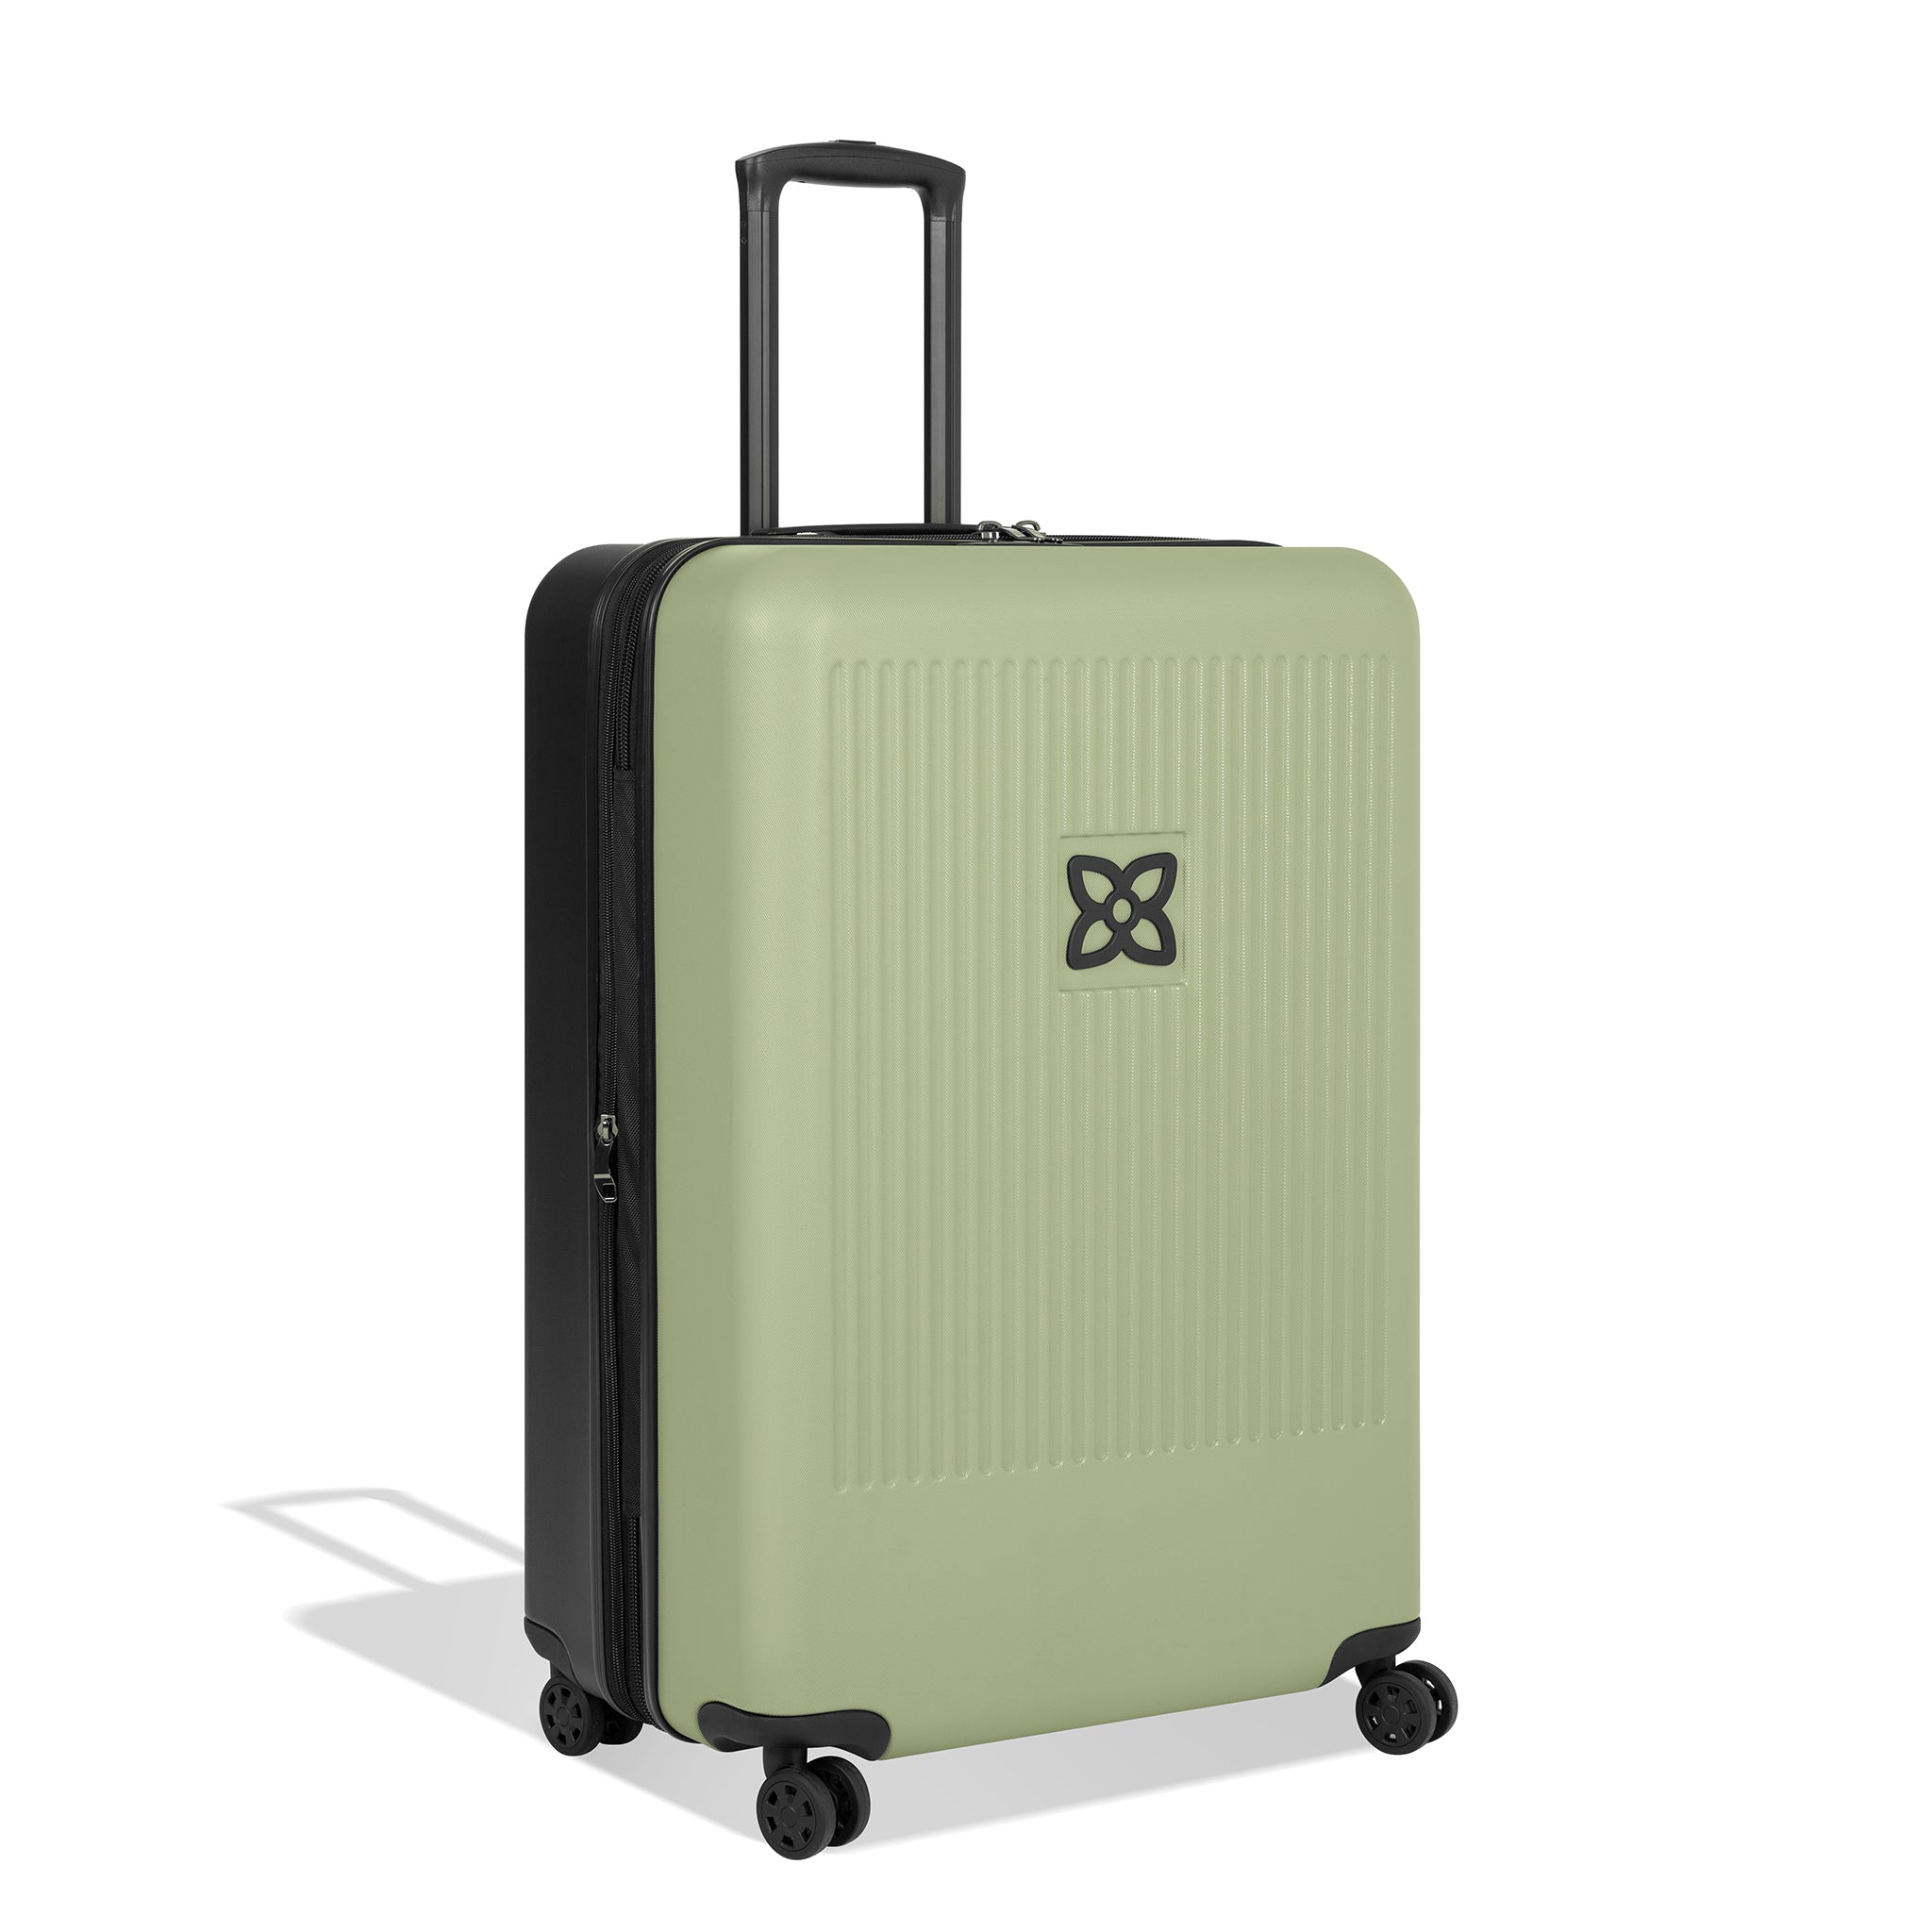 Angled front view of Sherpani hard-shell checked luggage, the Meridian in Sage. Meridian features include a retractable luggage handle, uncrushable exterior, TSA-approved locking zippers and four 36-degree spinner wheels. The Sage color is two-toned with the front of the suitcase in sage green and the back in classic black. #color_sage